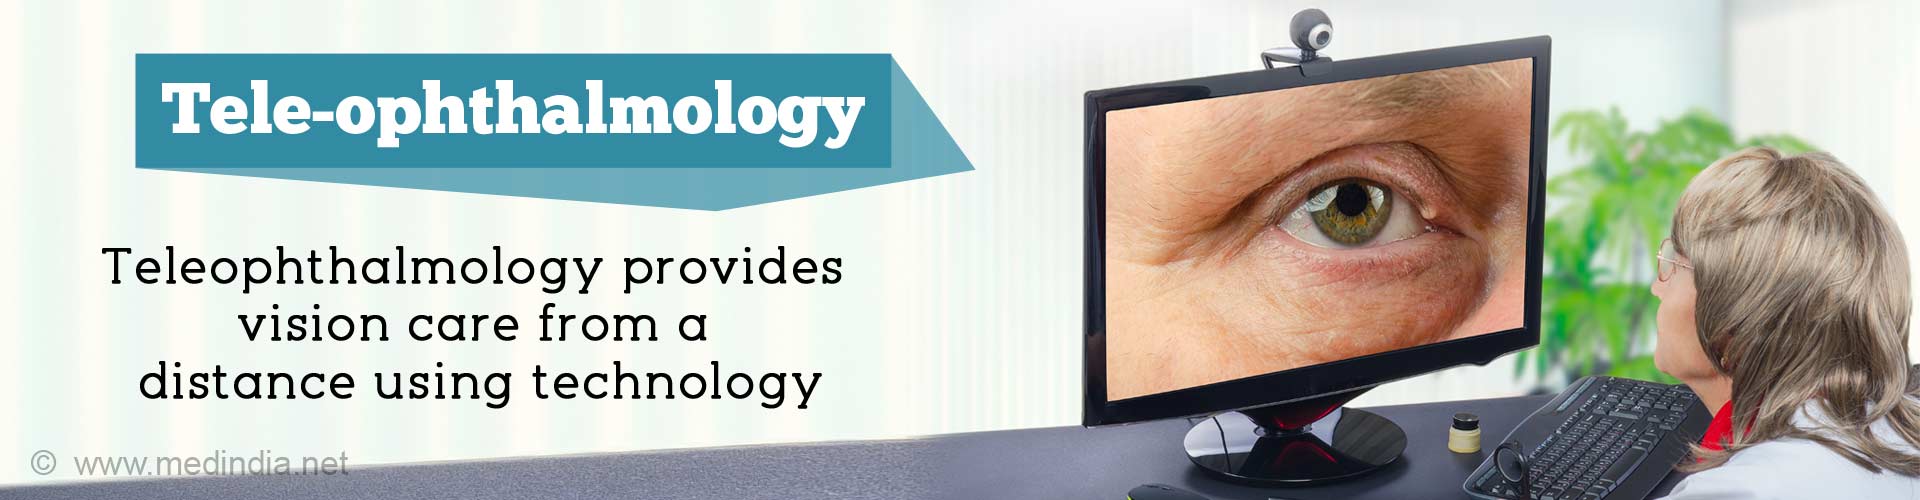 Tele-ophthalmology provides vision care from a distance using technology